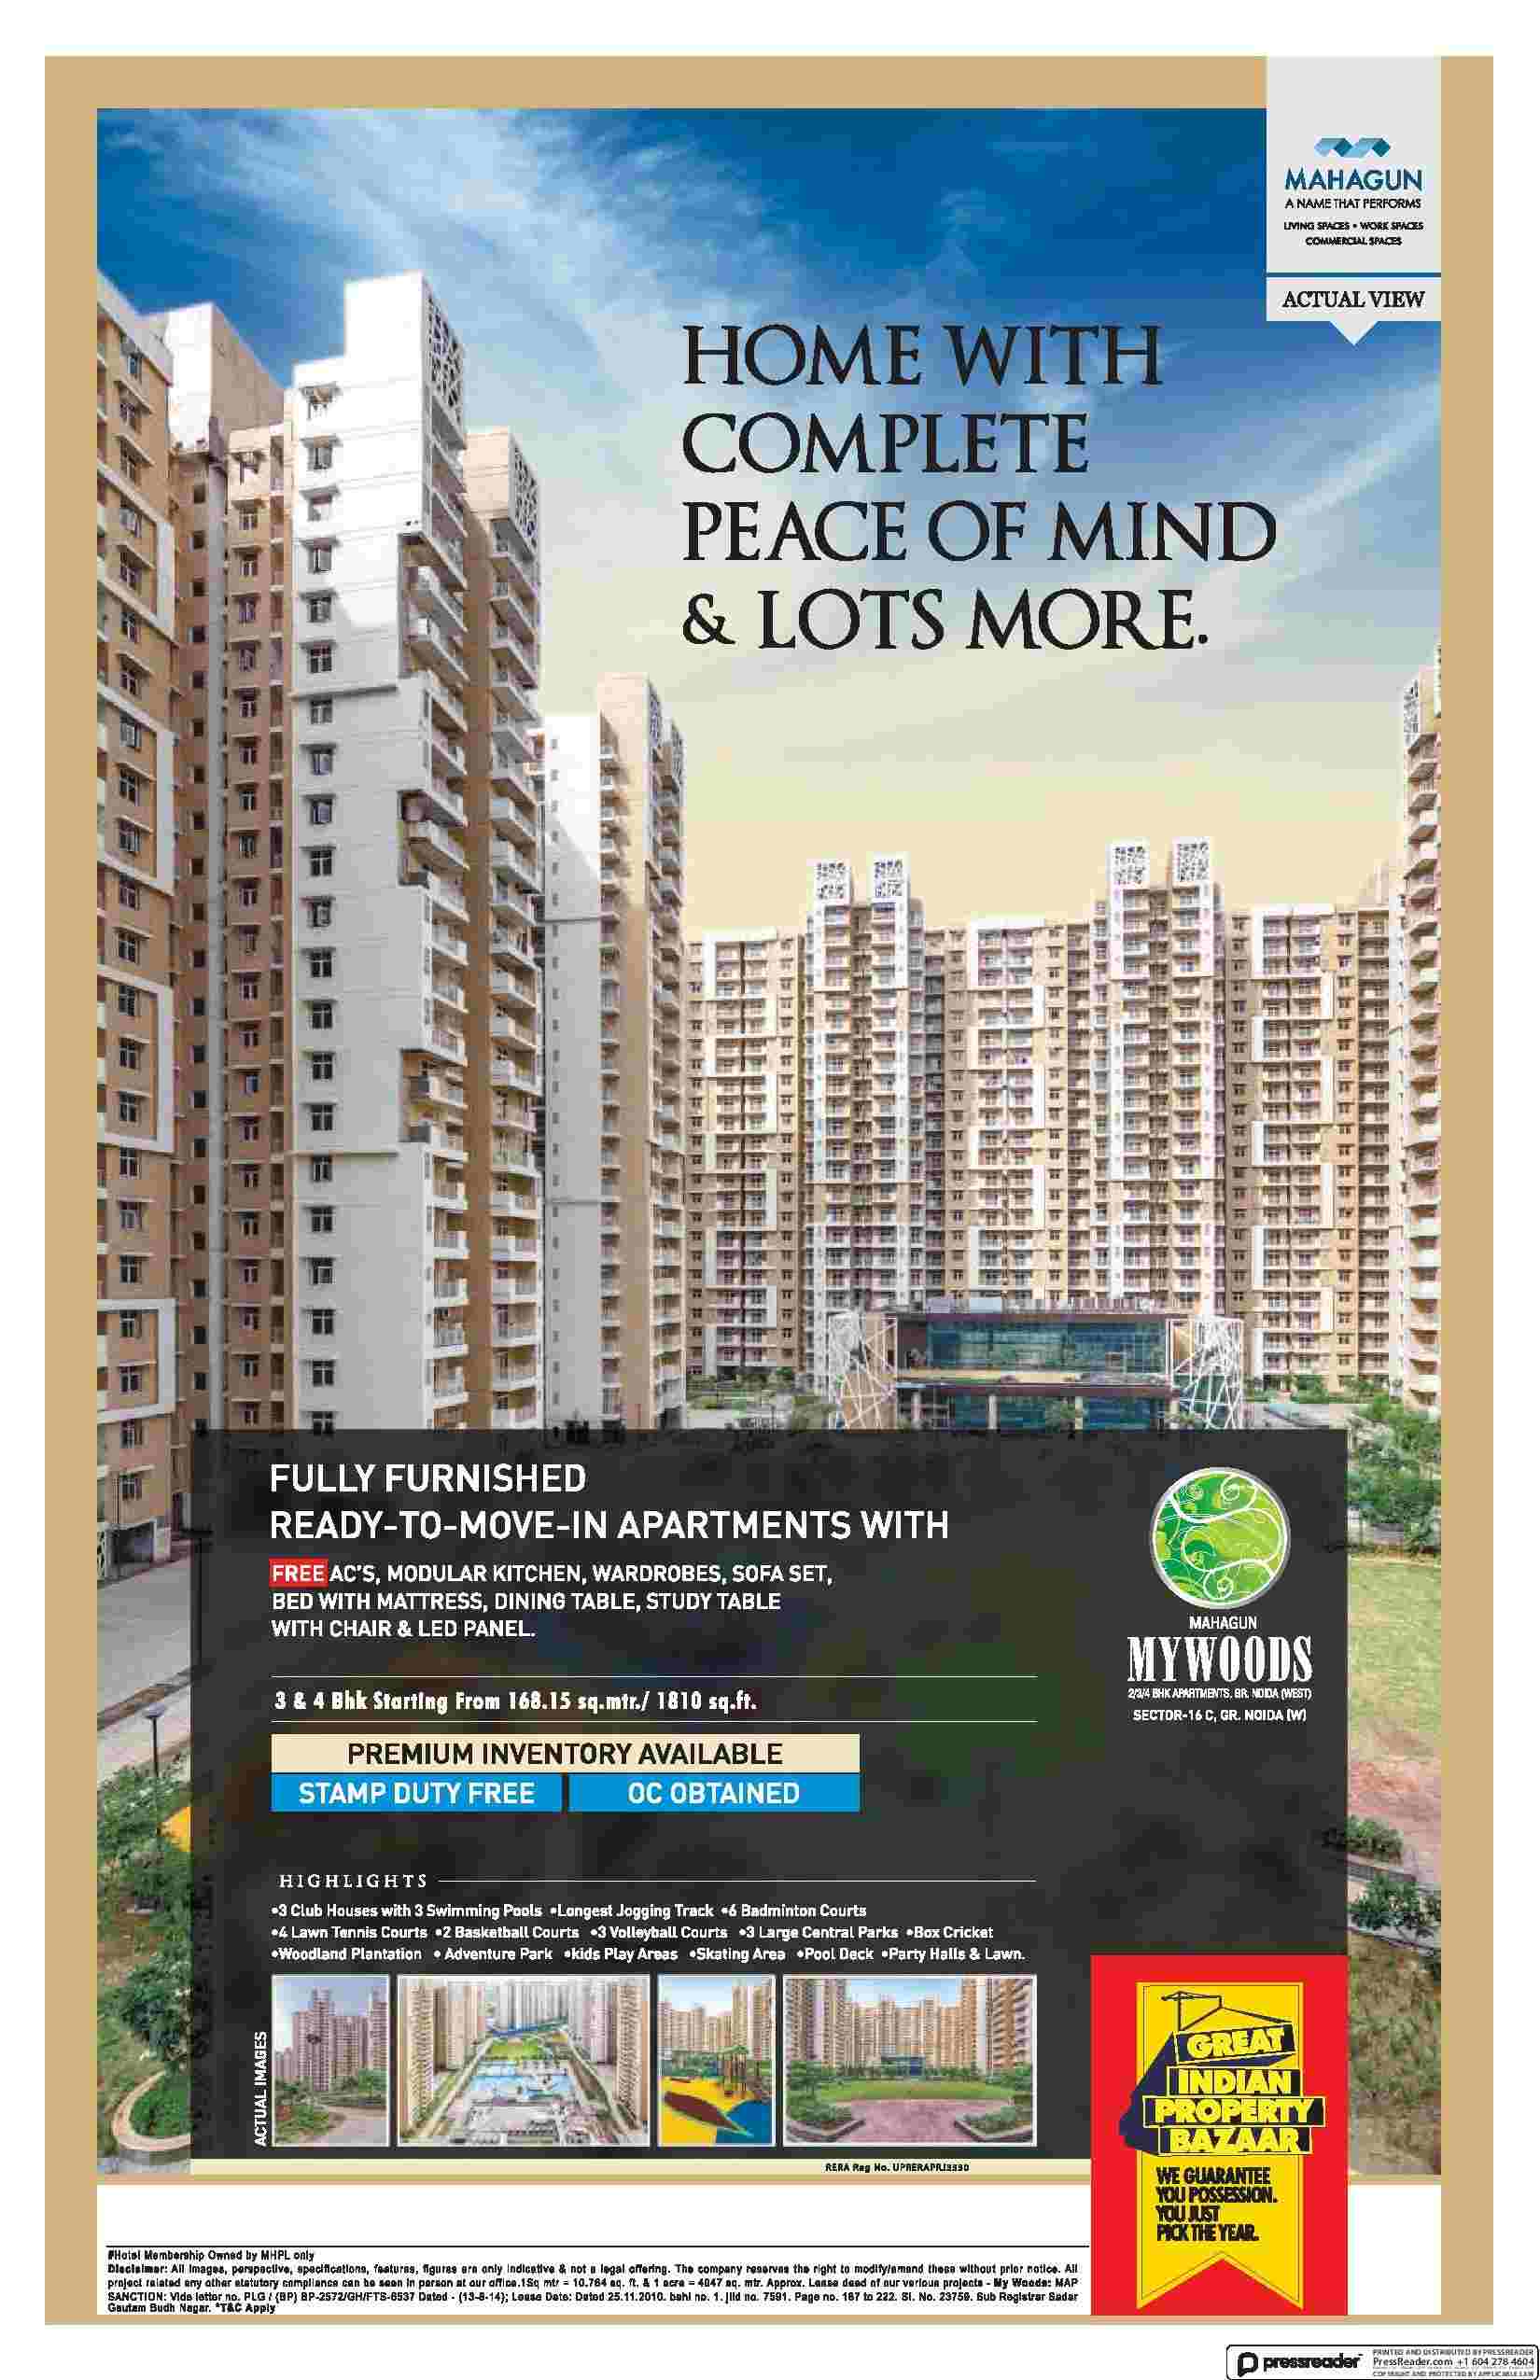 Live in home with complete peace of mind & lots more at Mahagun Mywoods in Greater Noida